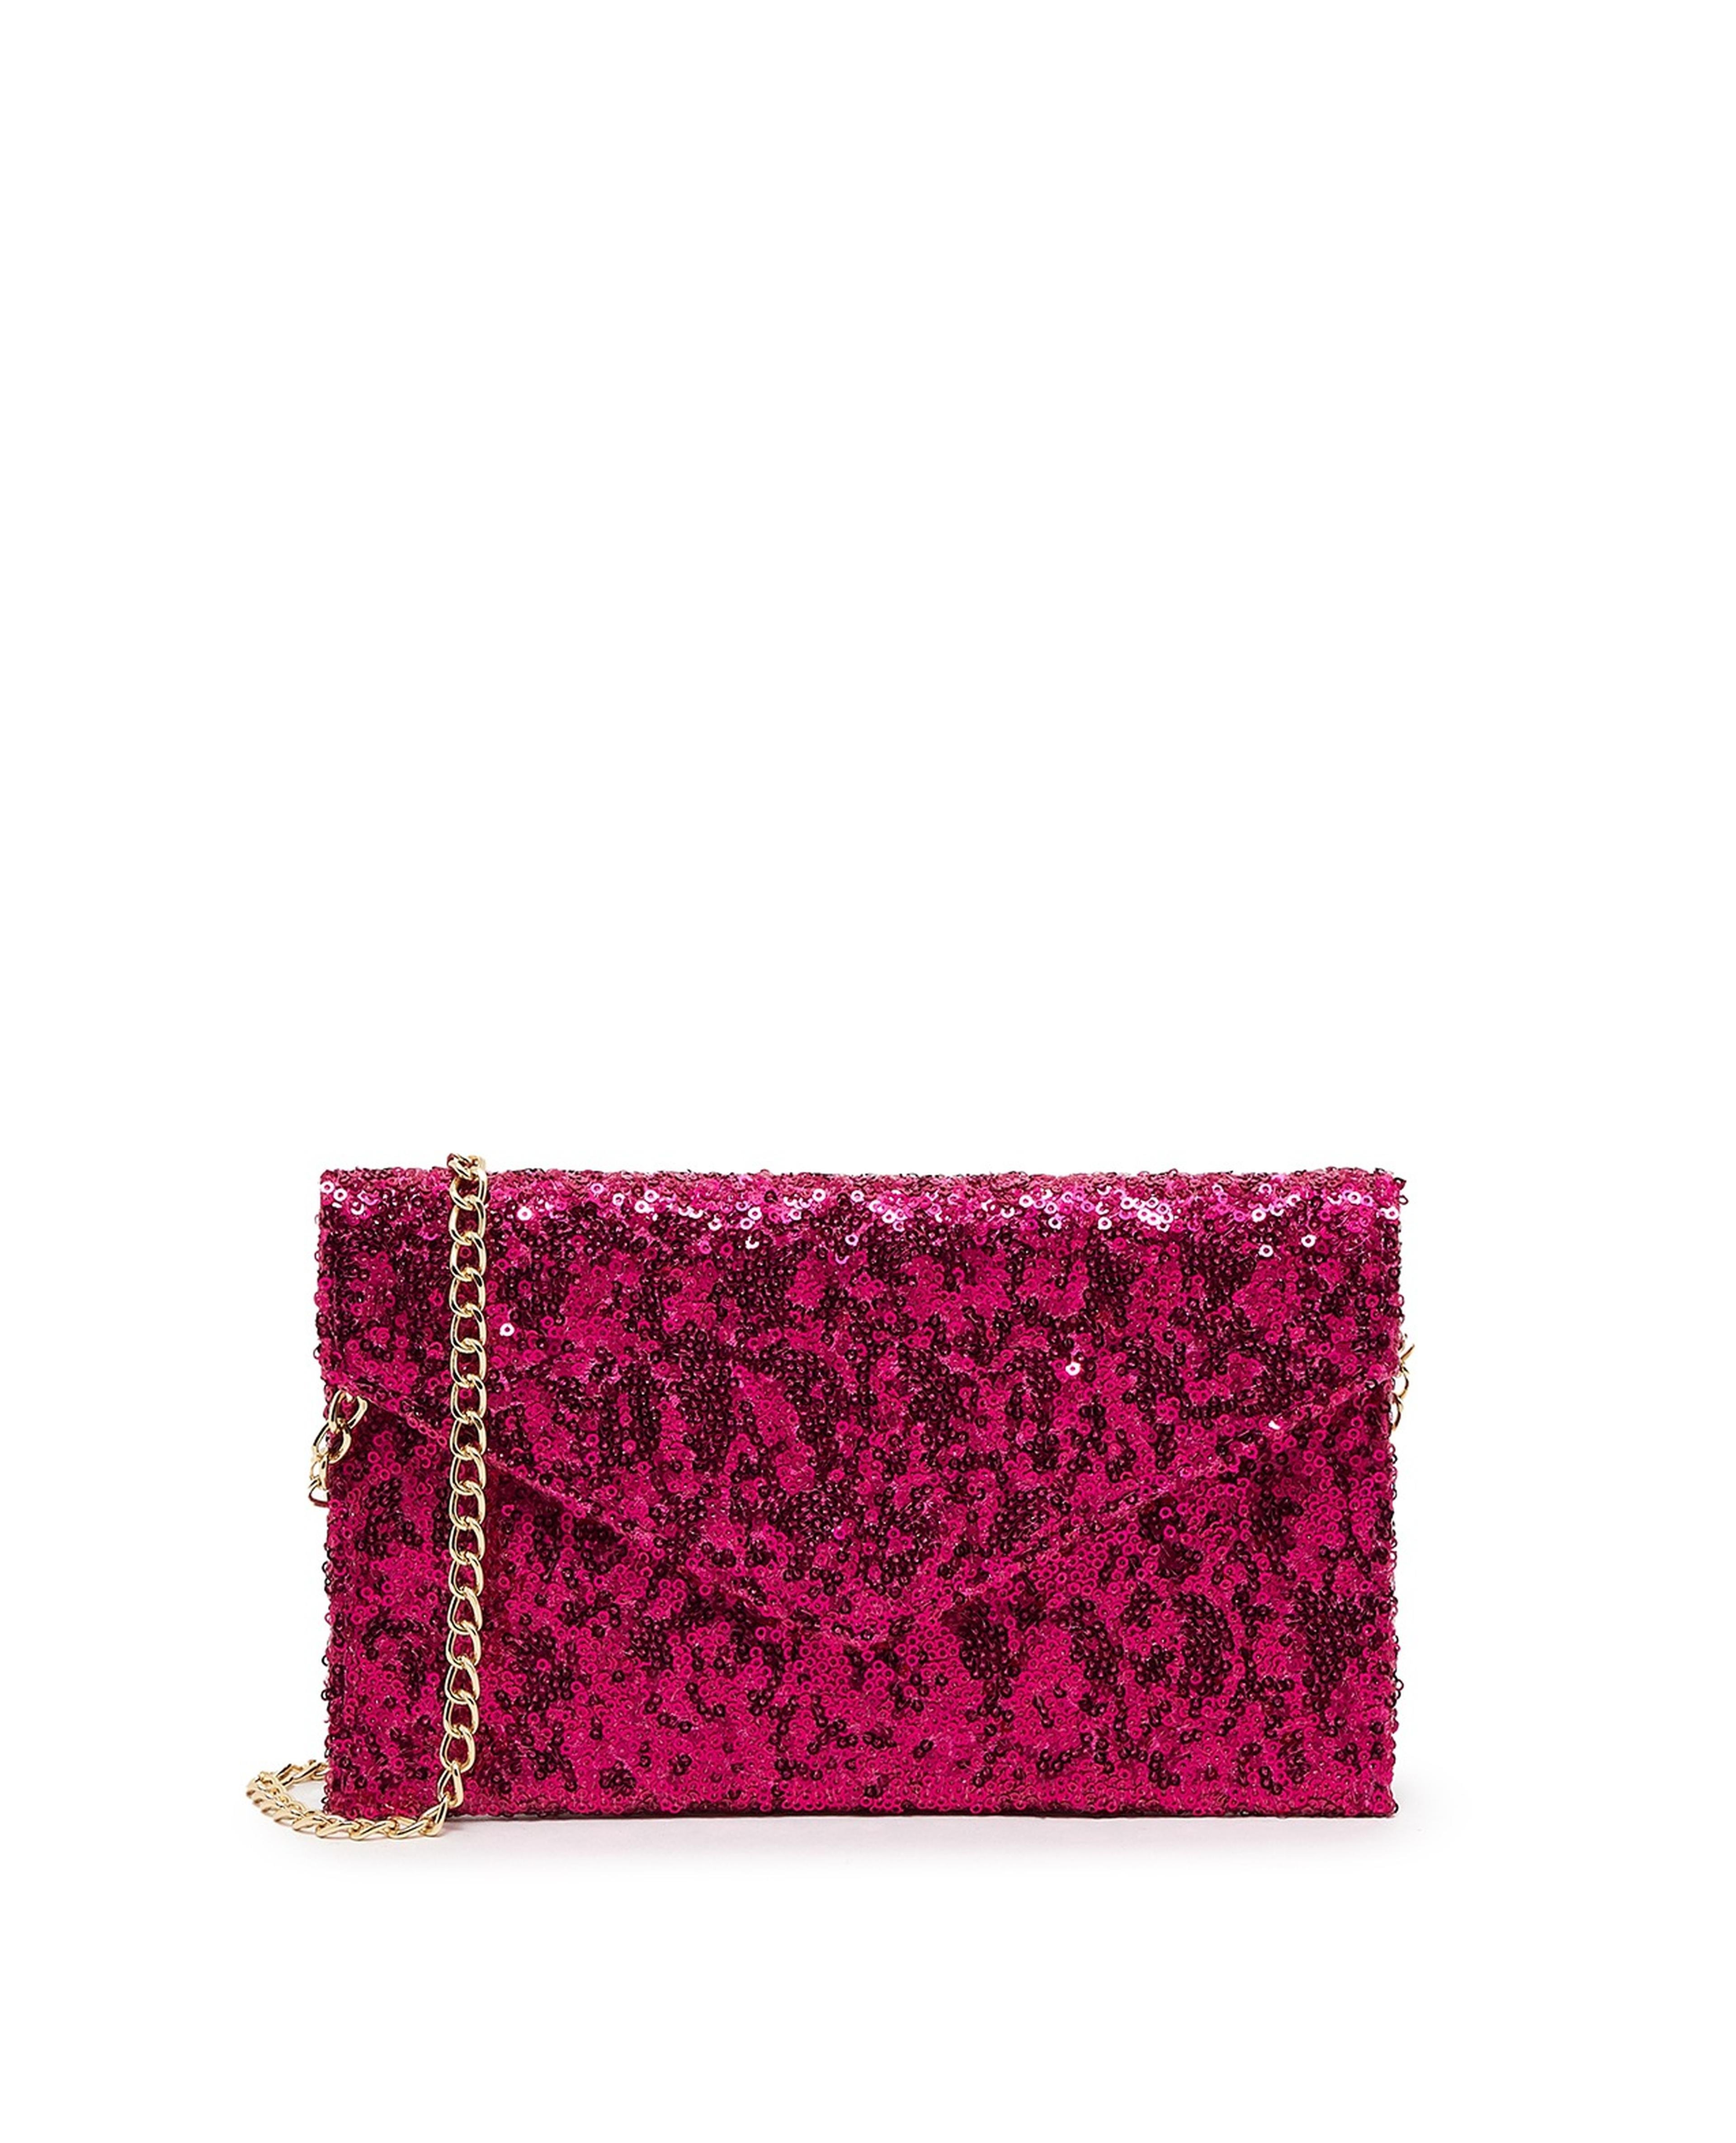 Sequined Envelop Clutch with Sling